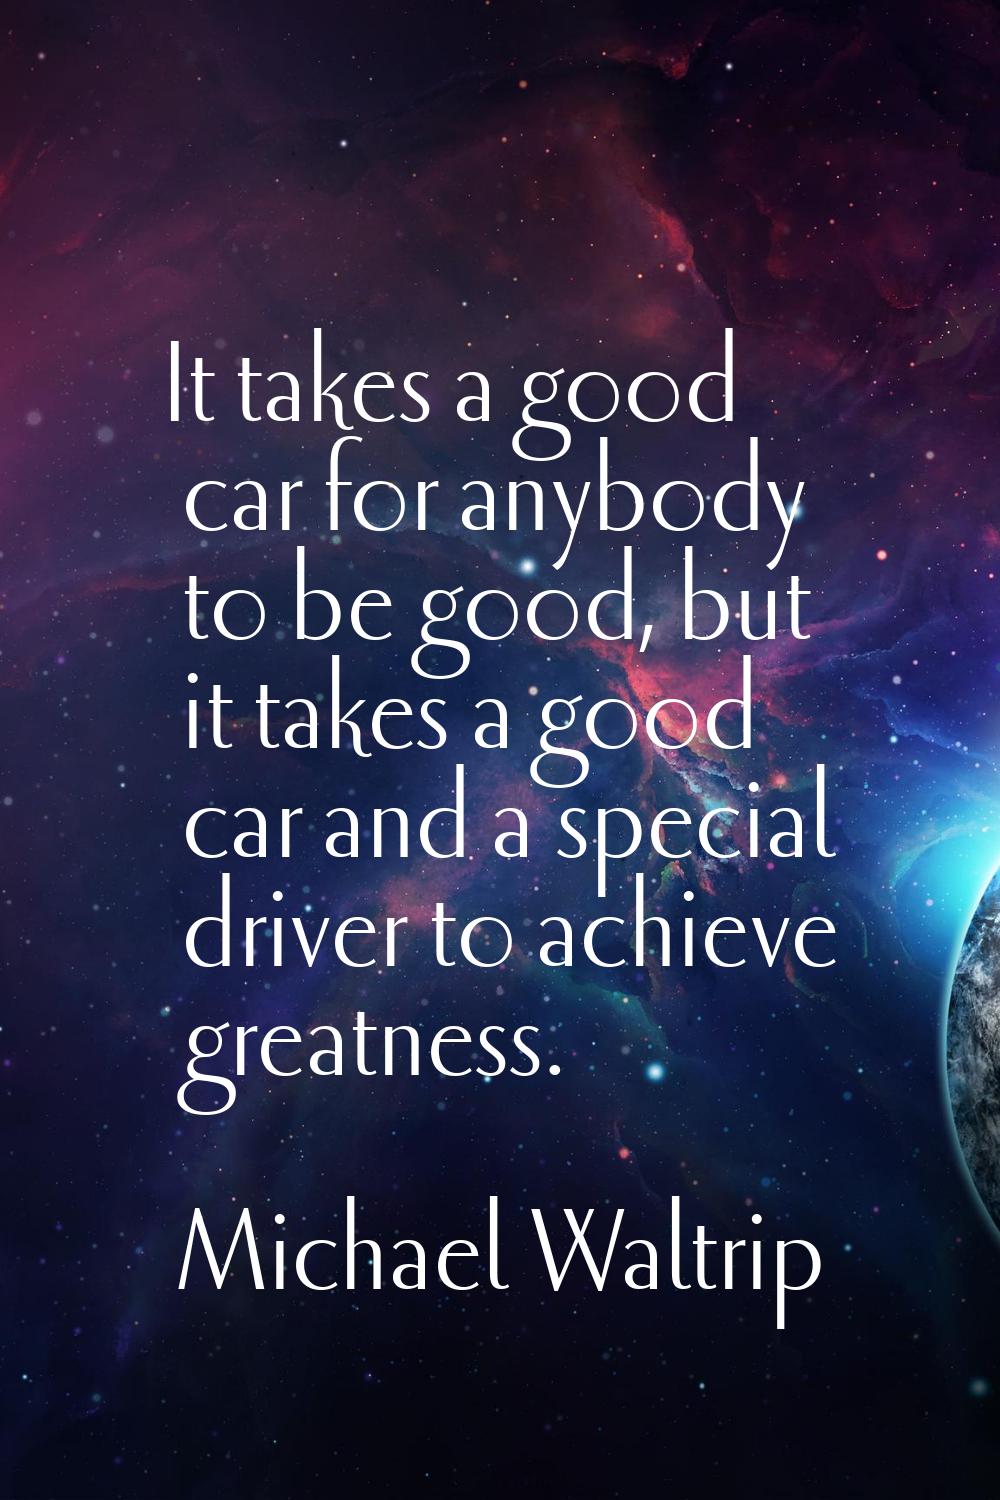 It takes a good car for anybody to be good, but it takes a good car and a special driver to achieve